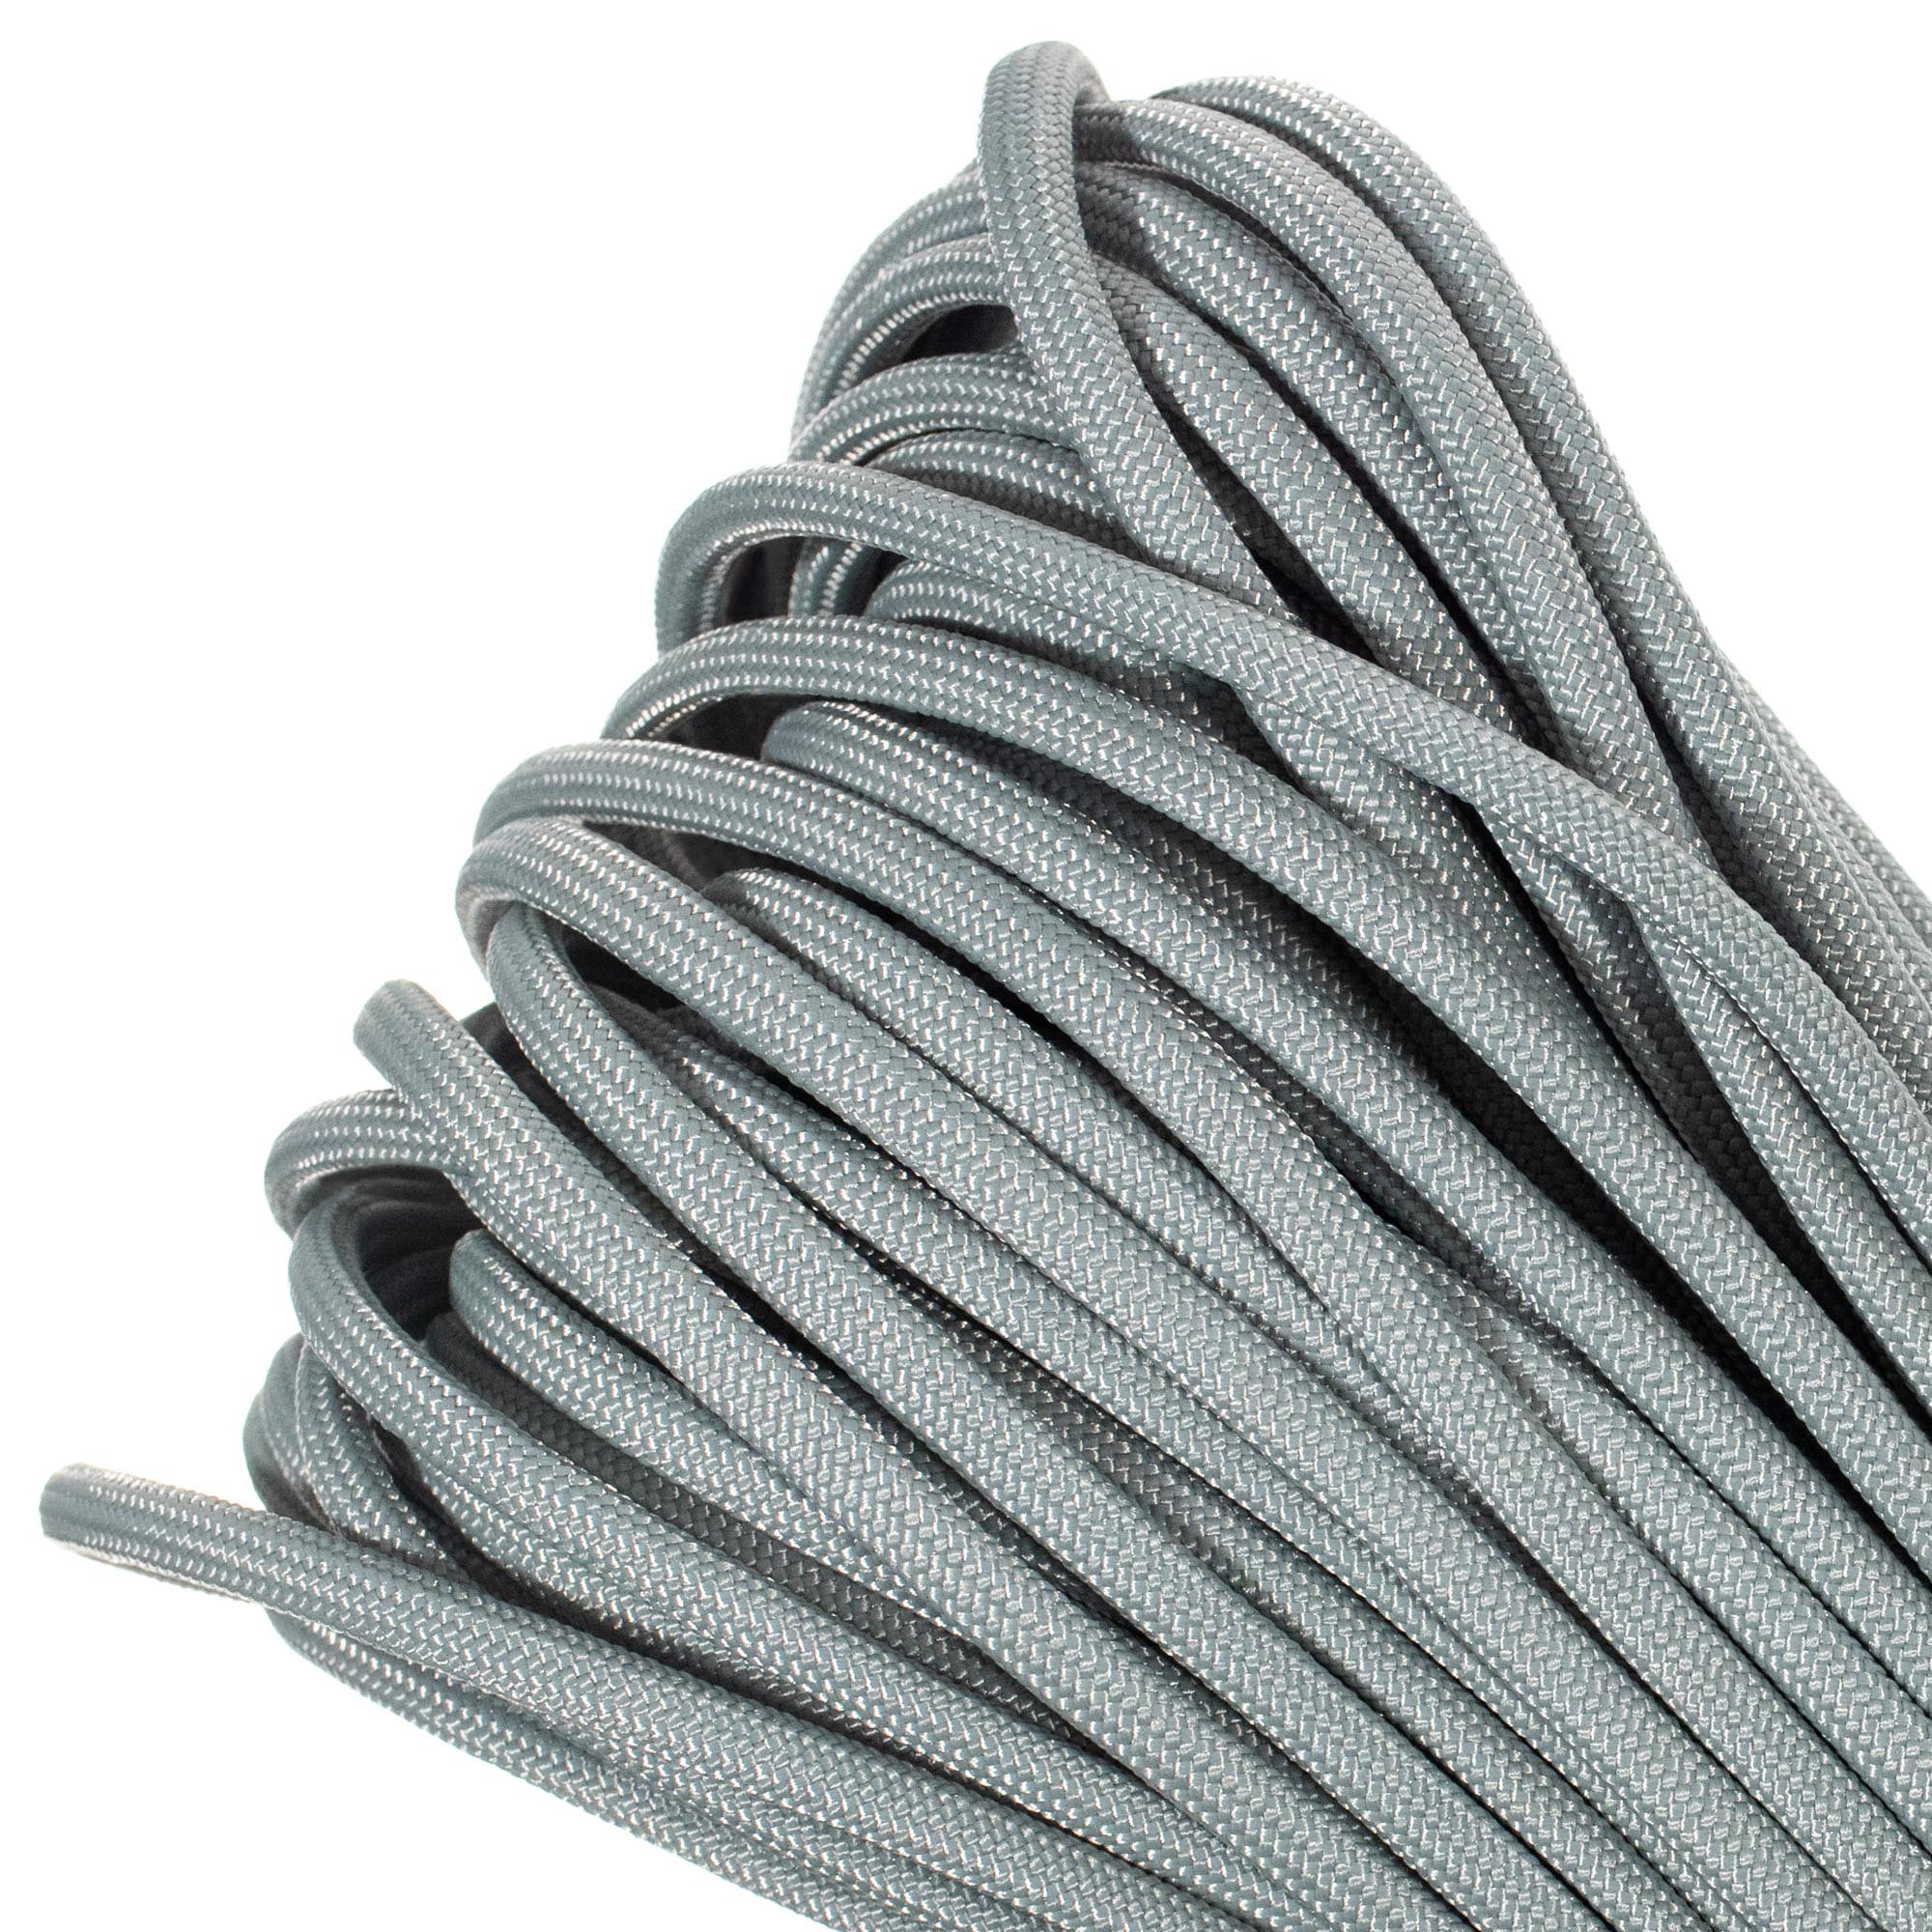 Charcoal Grey Paracord 1000 Foot 550 lb Bracelet Camping Survival Kit Rope Cord 